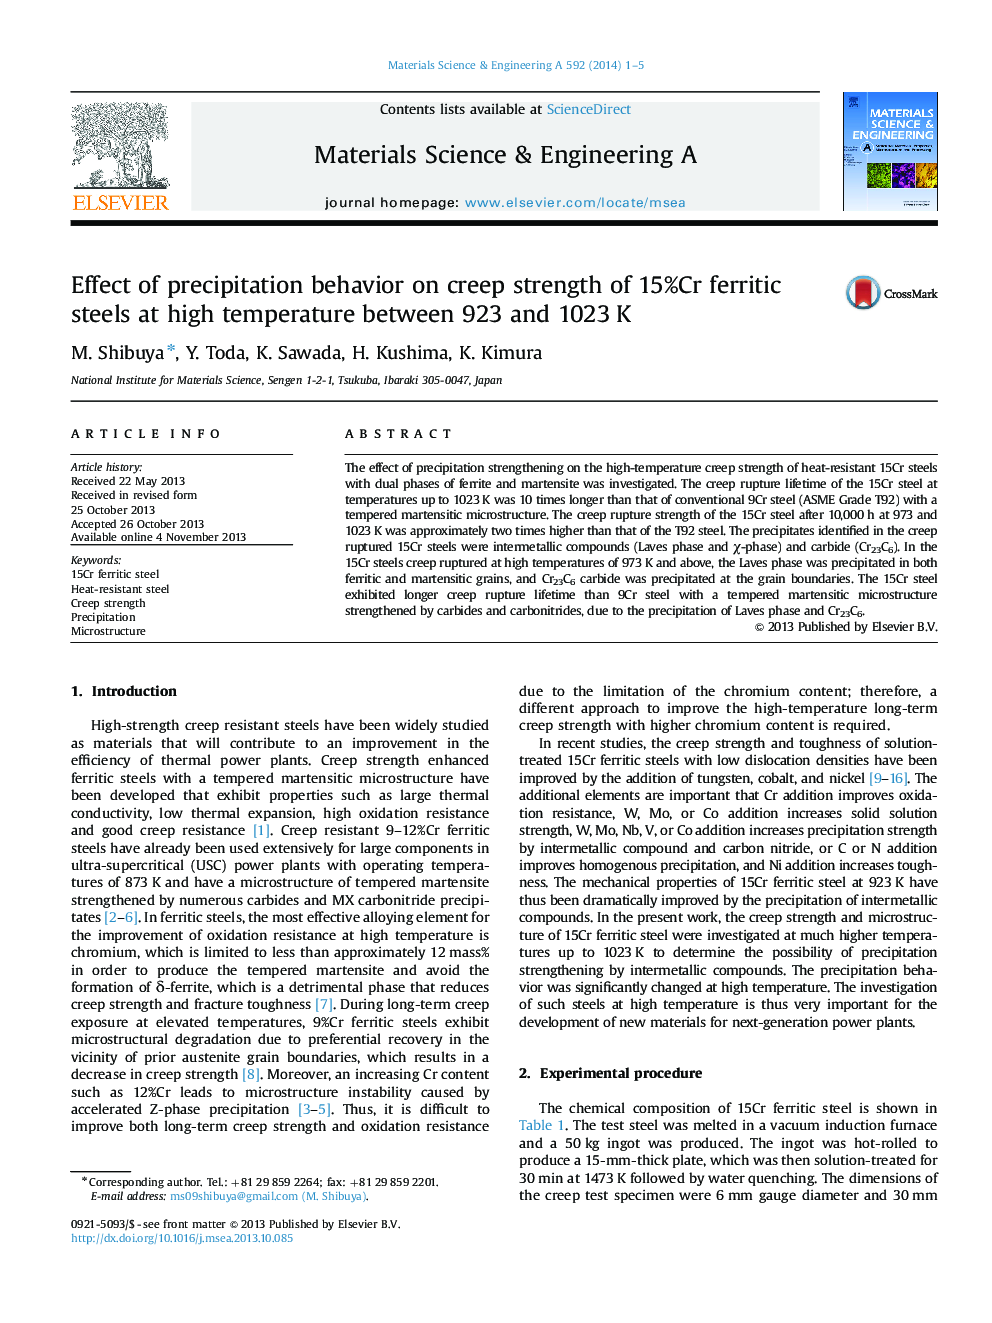 Effect of precipitation behavior on creep strength of 15%Cr ferritic steels at high temperature between 923 and 1023Â K